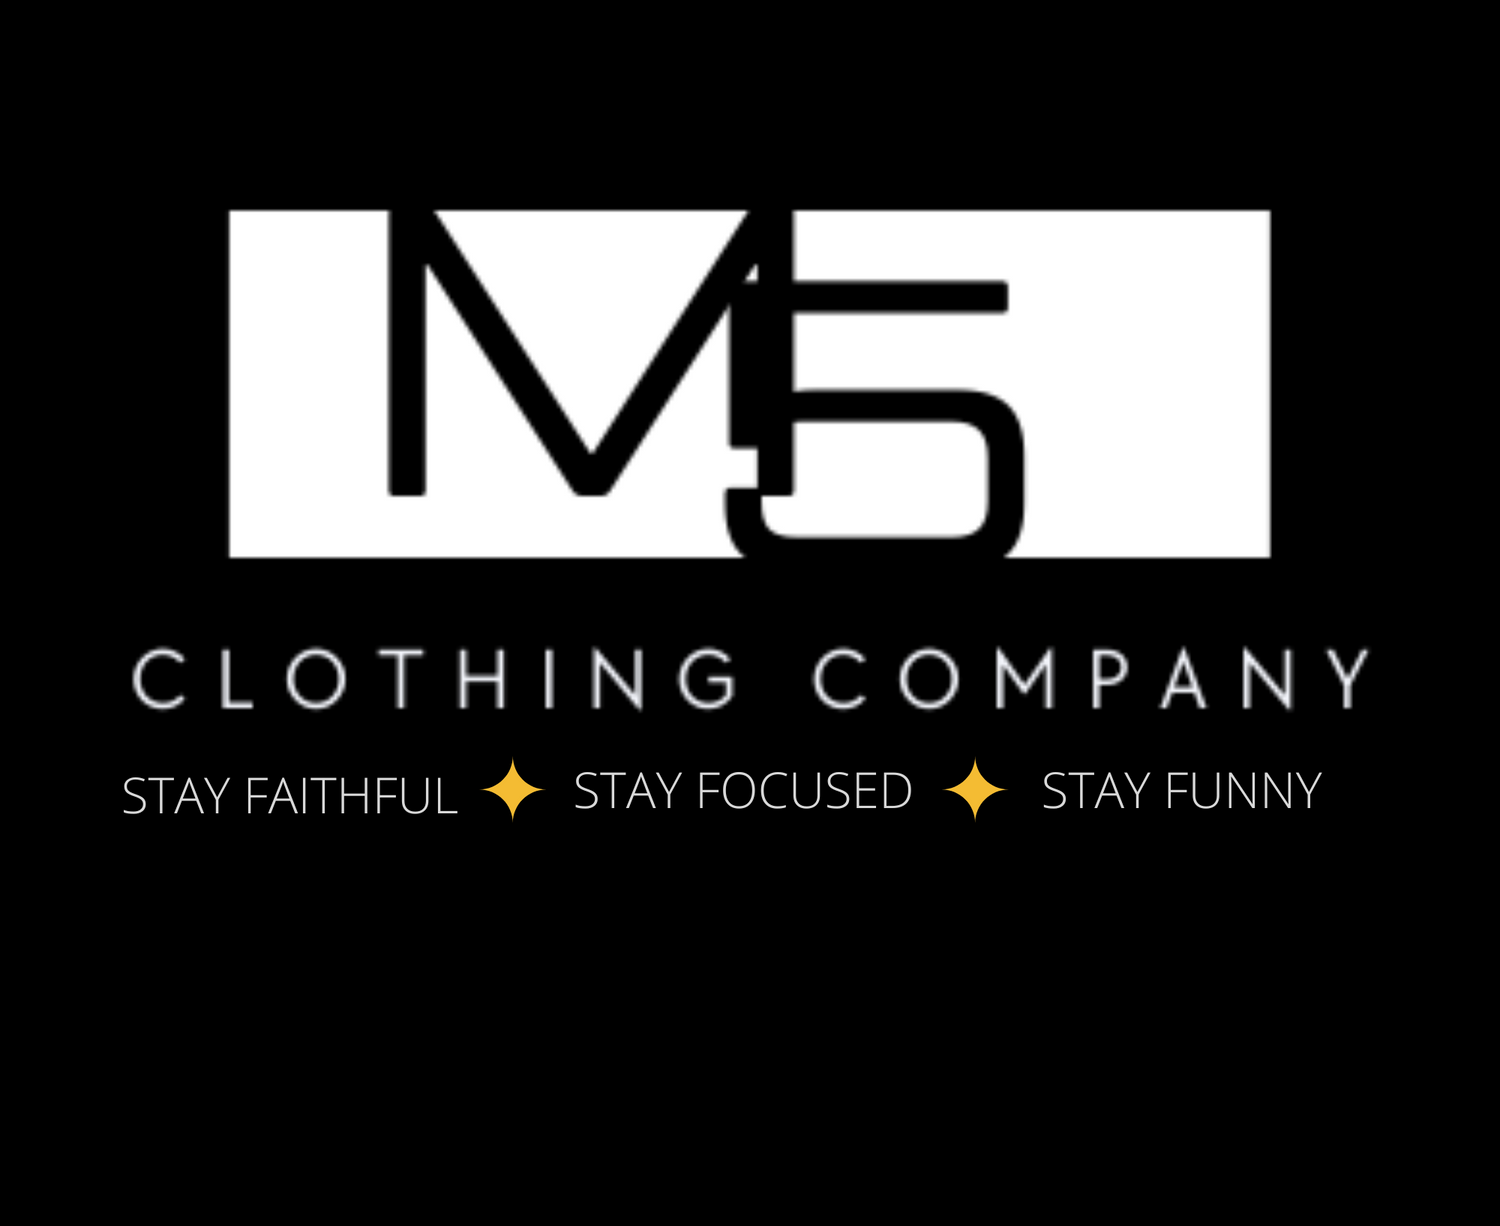 M:5 Clothing Company STAY FAITHFUL, STAY FOCUSED AND STAY FUNNY